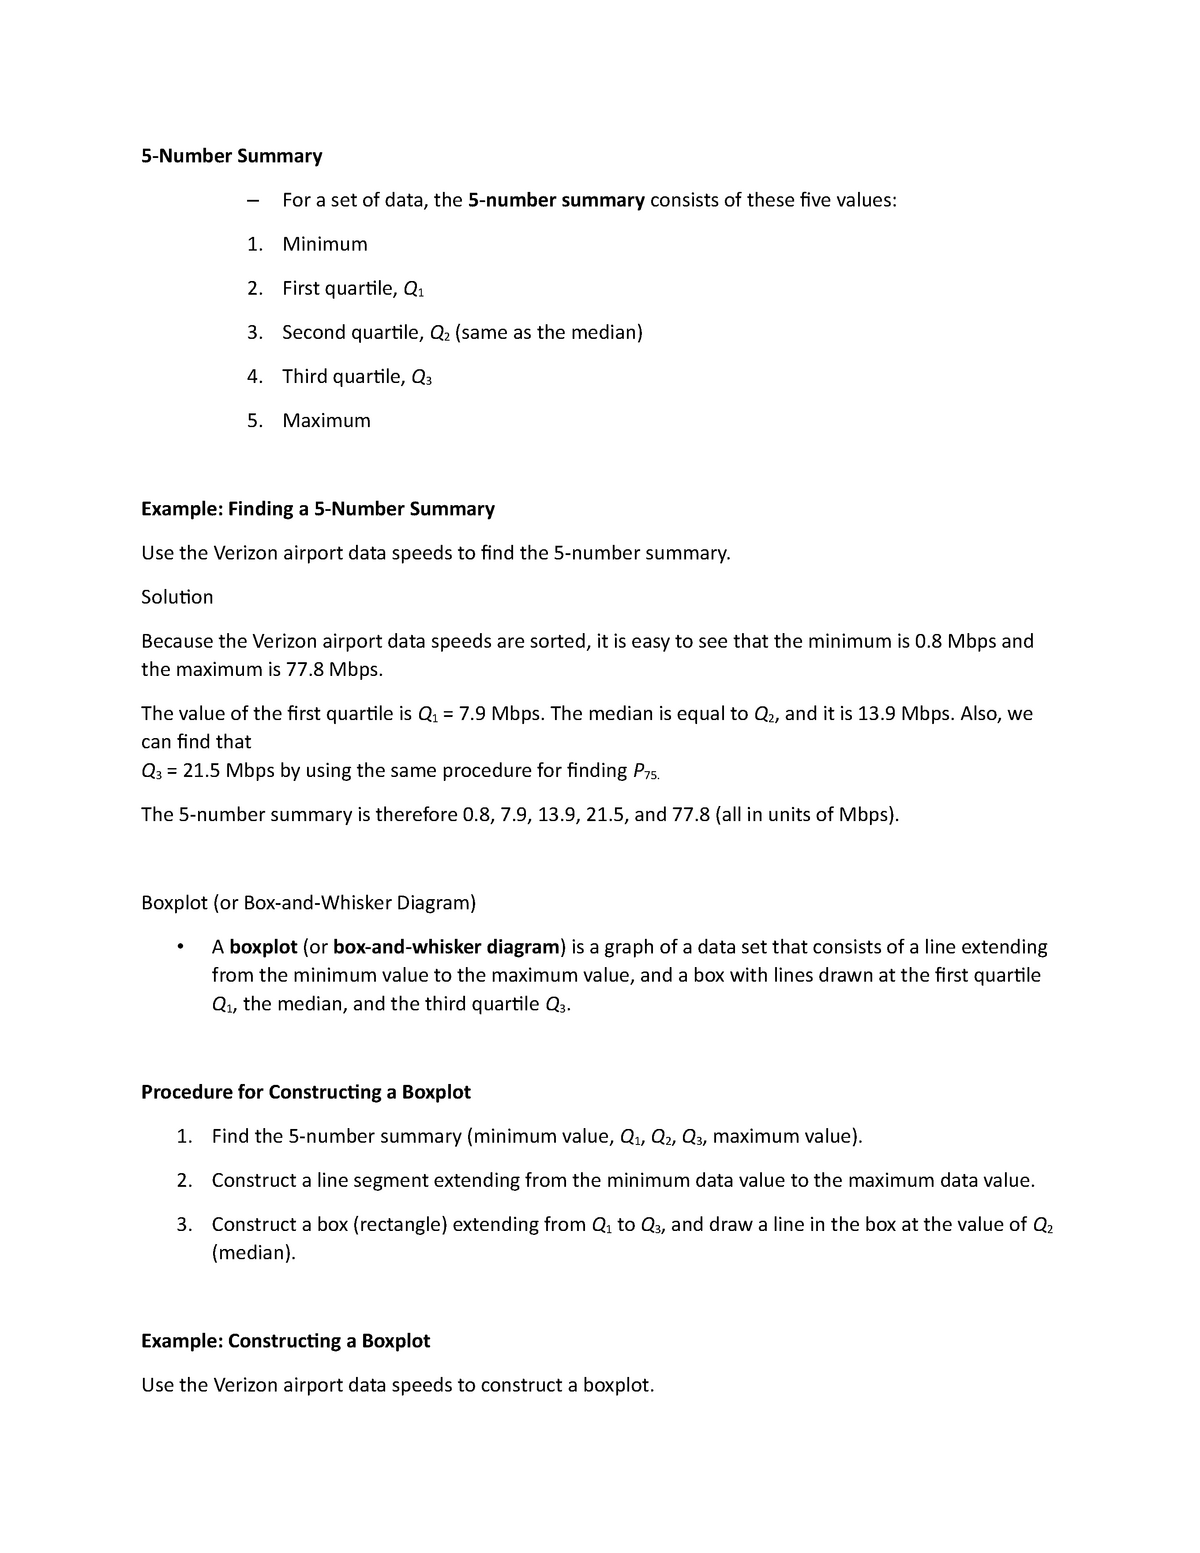 lecture-notes-3-5-number-summary-for-a-set-of-data-the-5-number